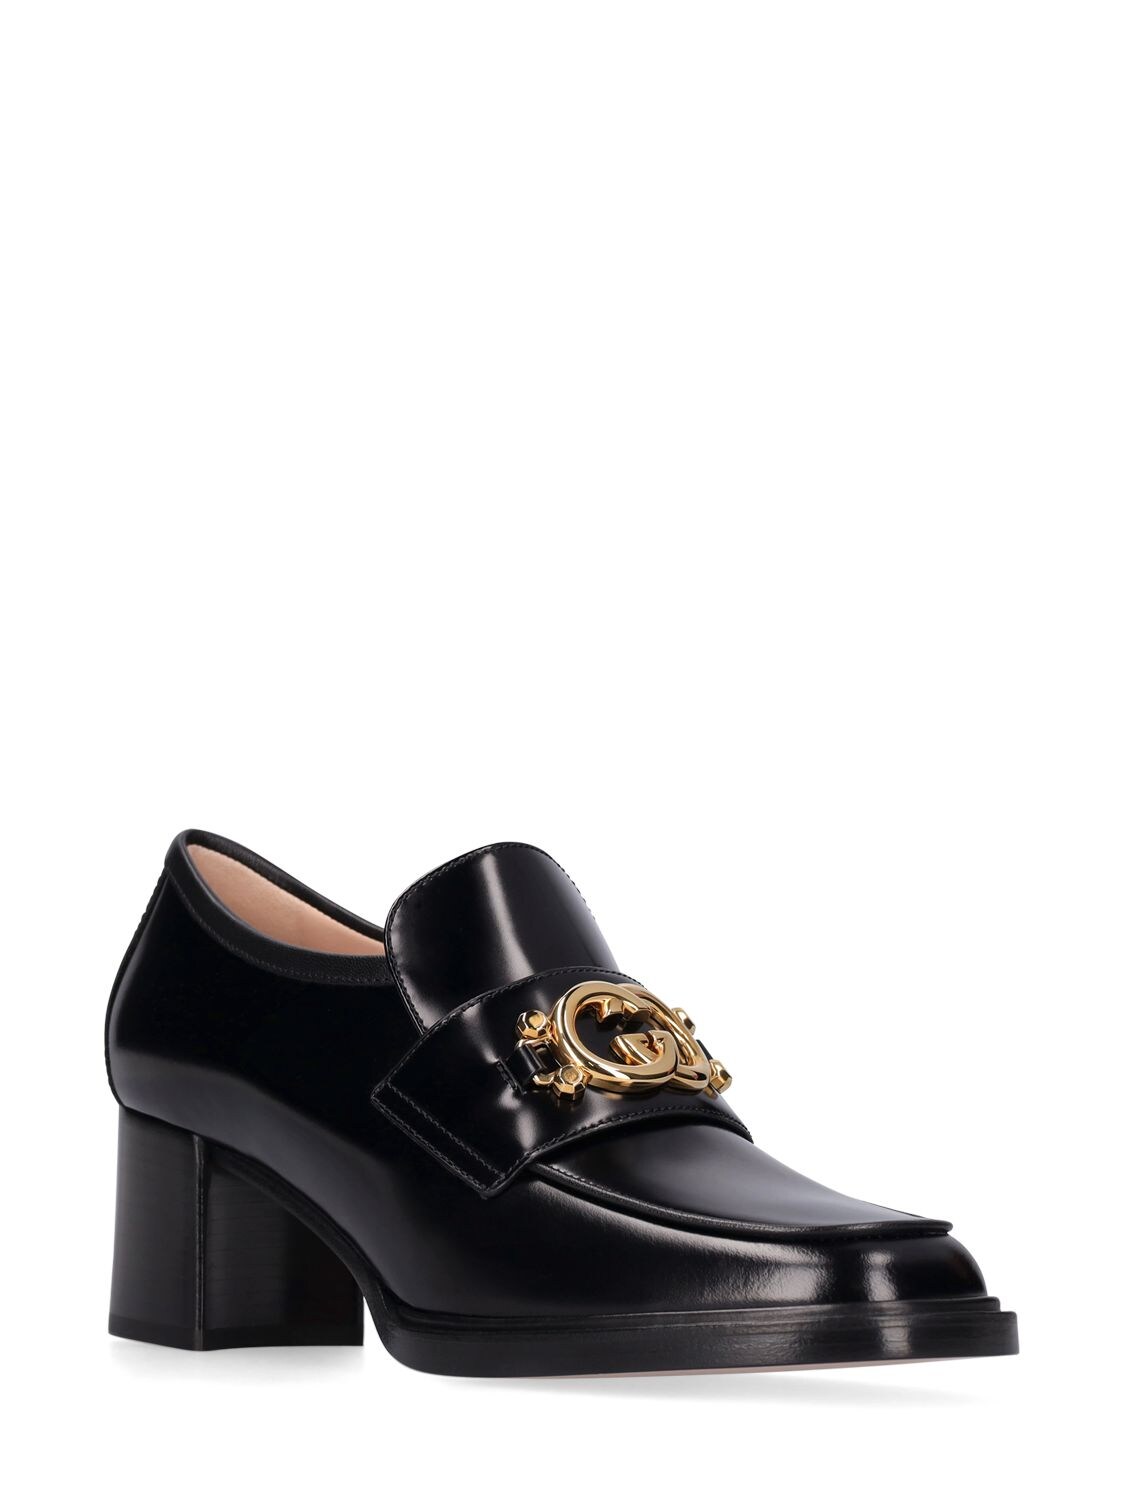 GUCCI 55mm Nadeline Leather Loafers